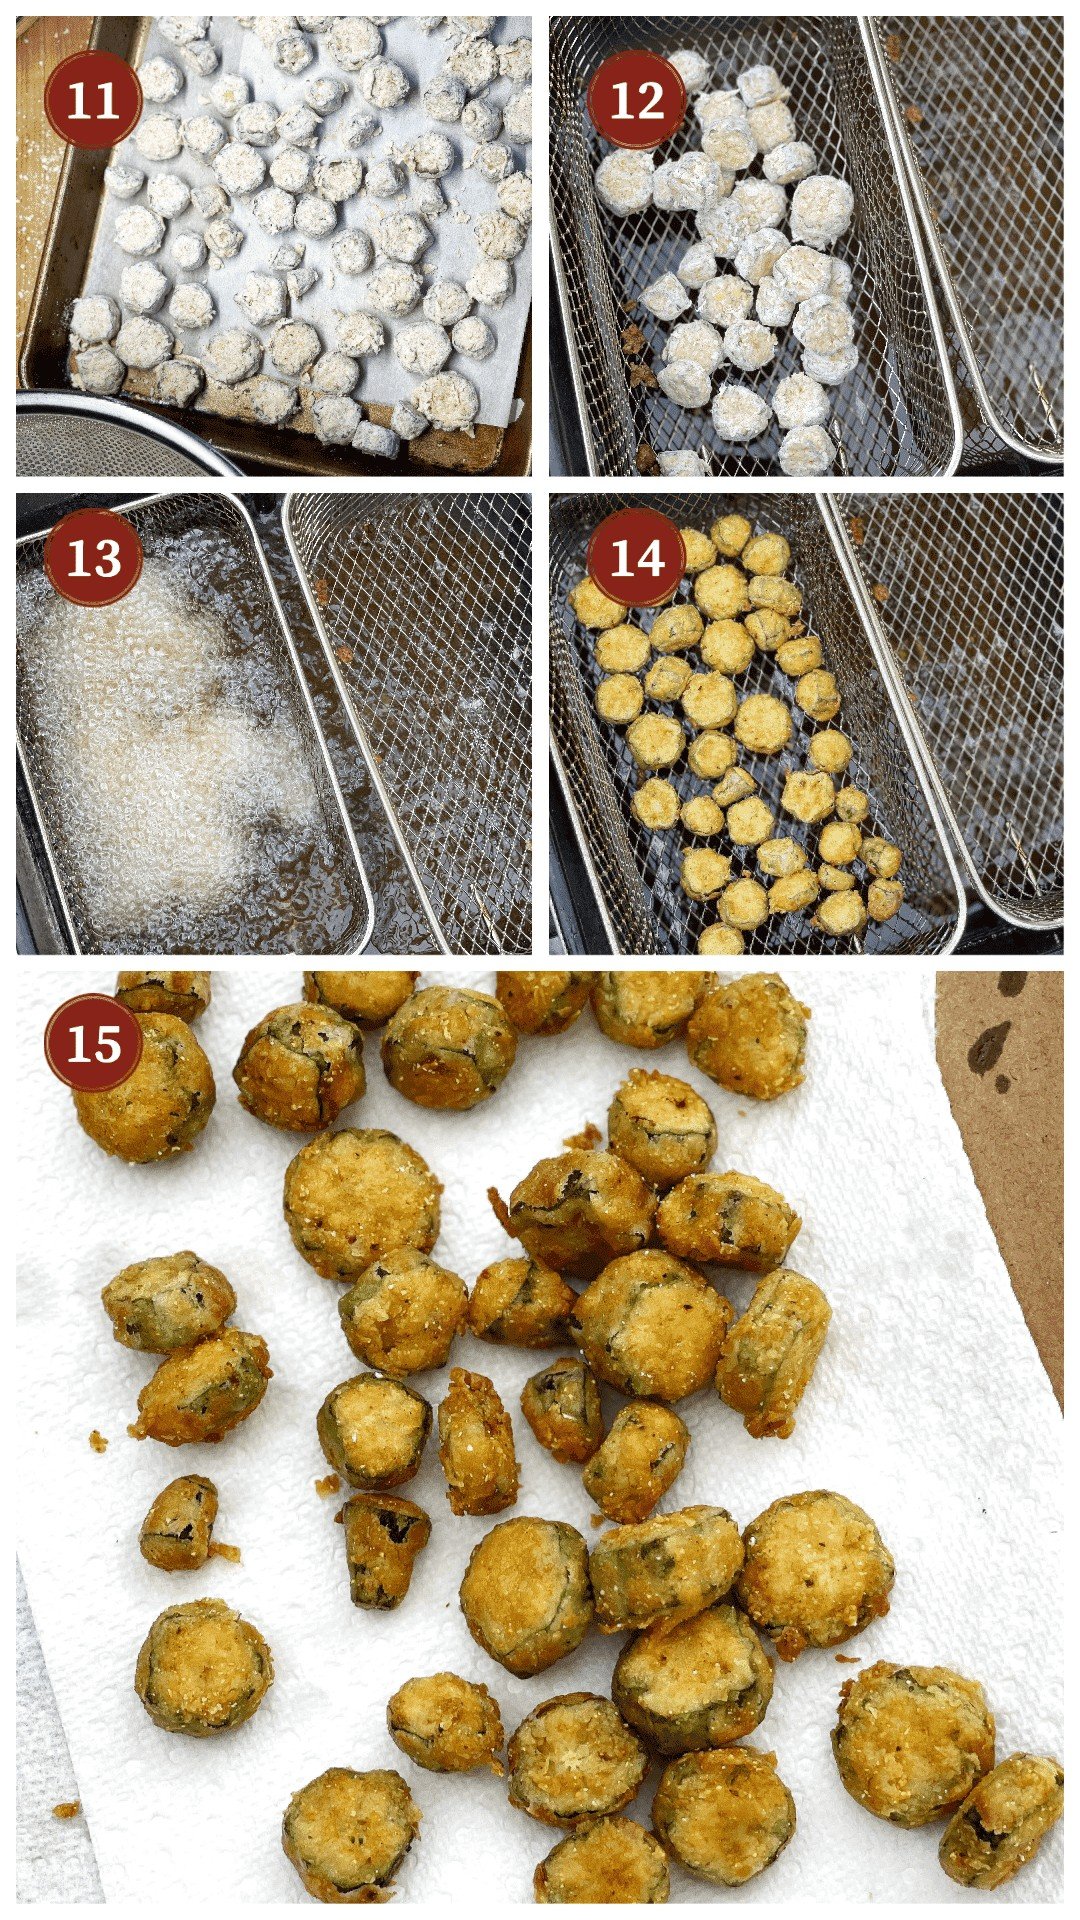 A collage of images showing how to fry okra in a deep fryer, steps 11 - 15.